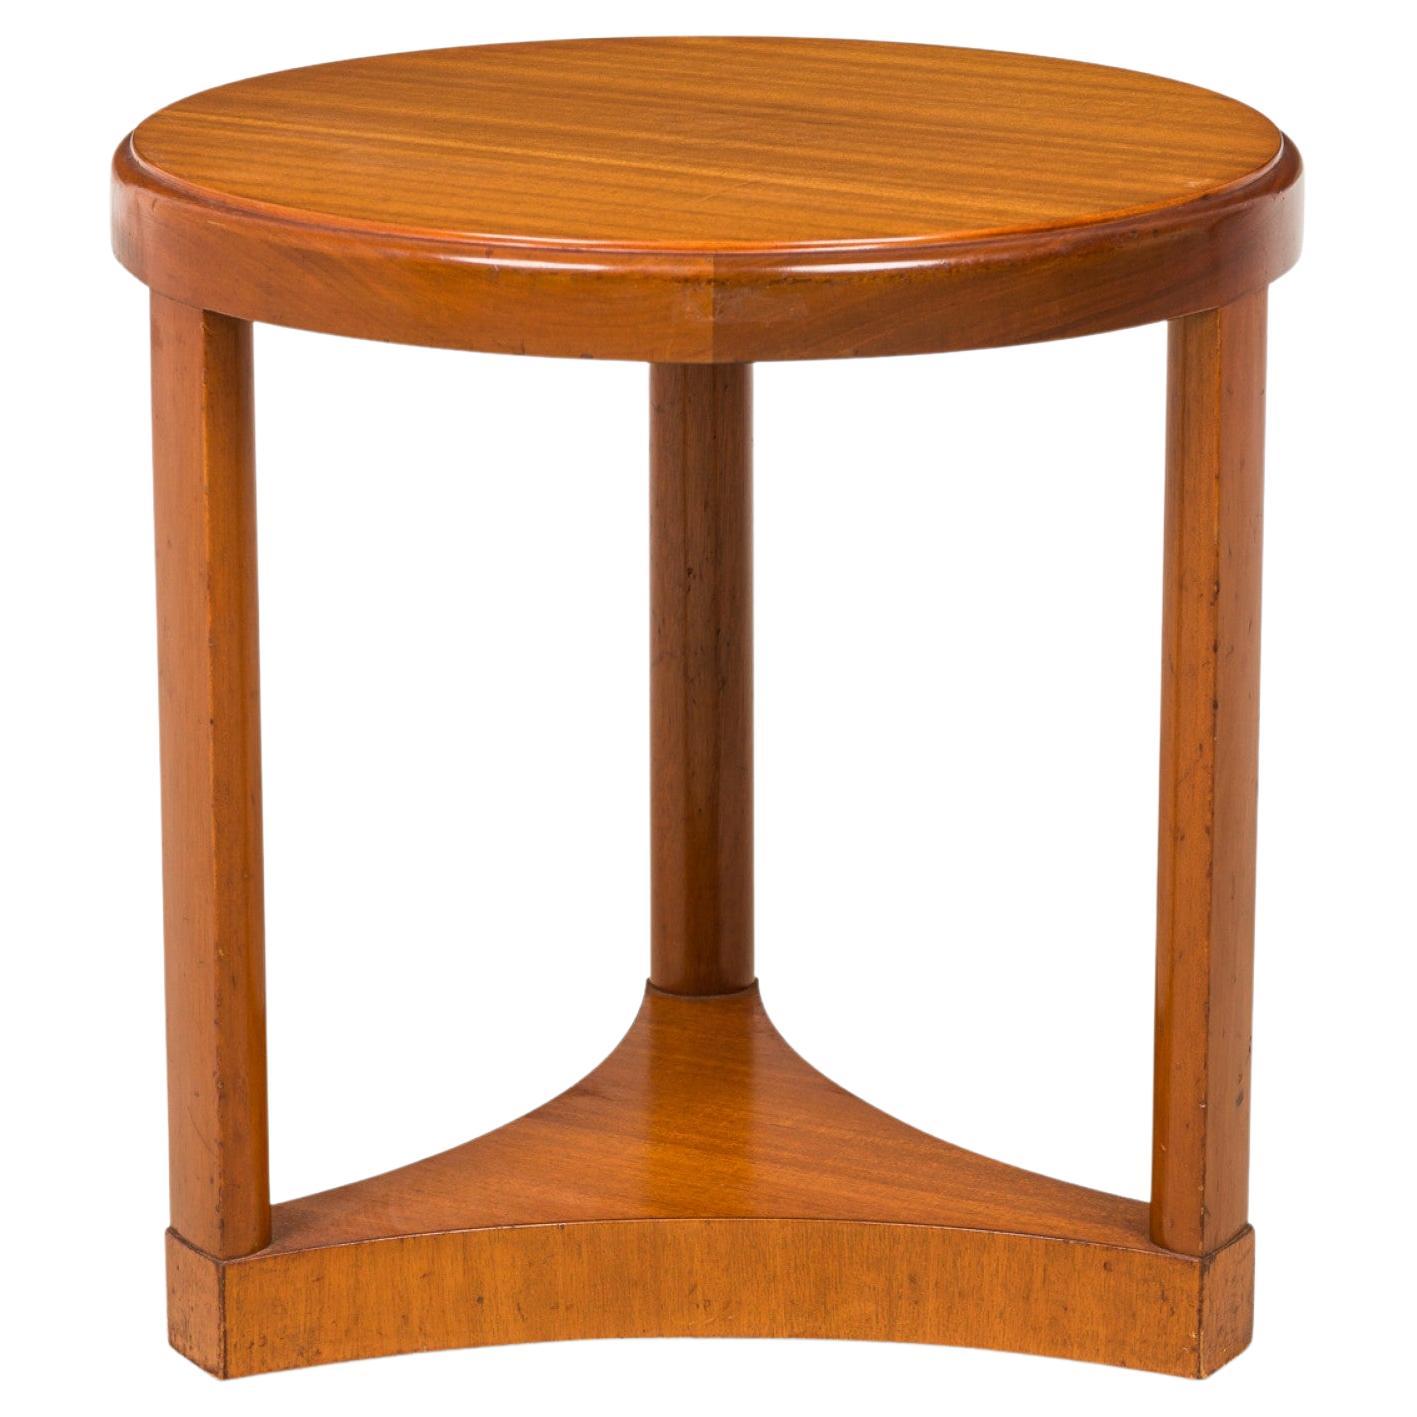 Edward Wormley Round Wooden End / Side Table